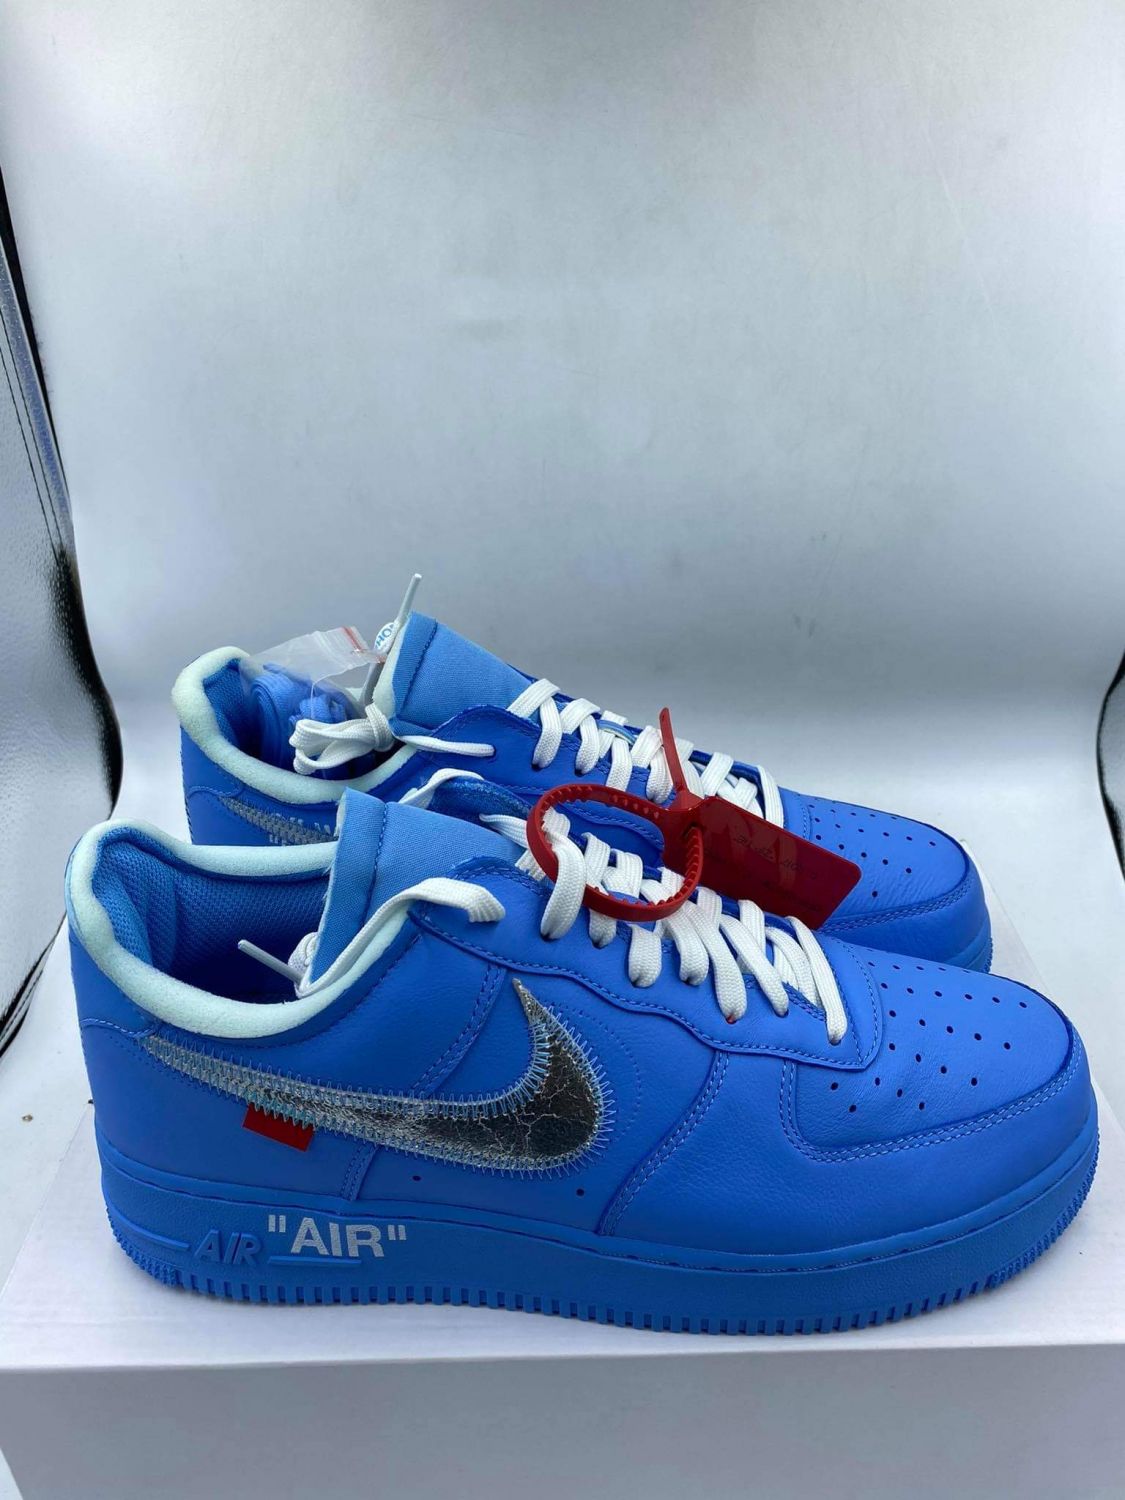 Nike Air Force 1 Low 'Off-White - Mca' Shoes - Size 7.5